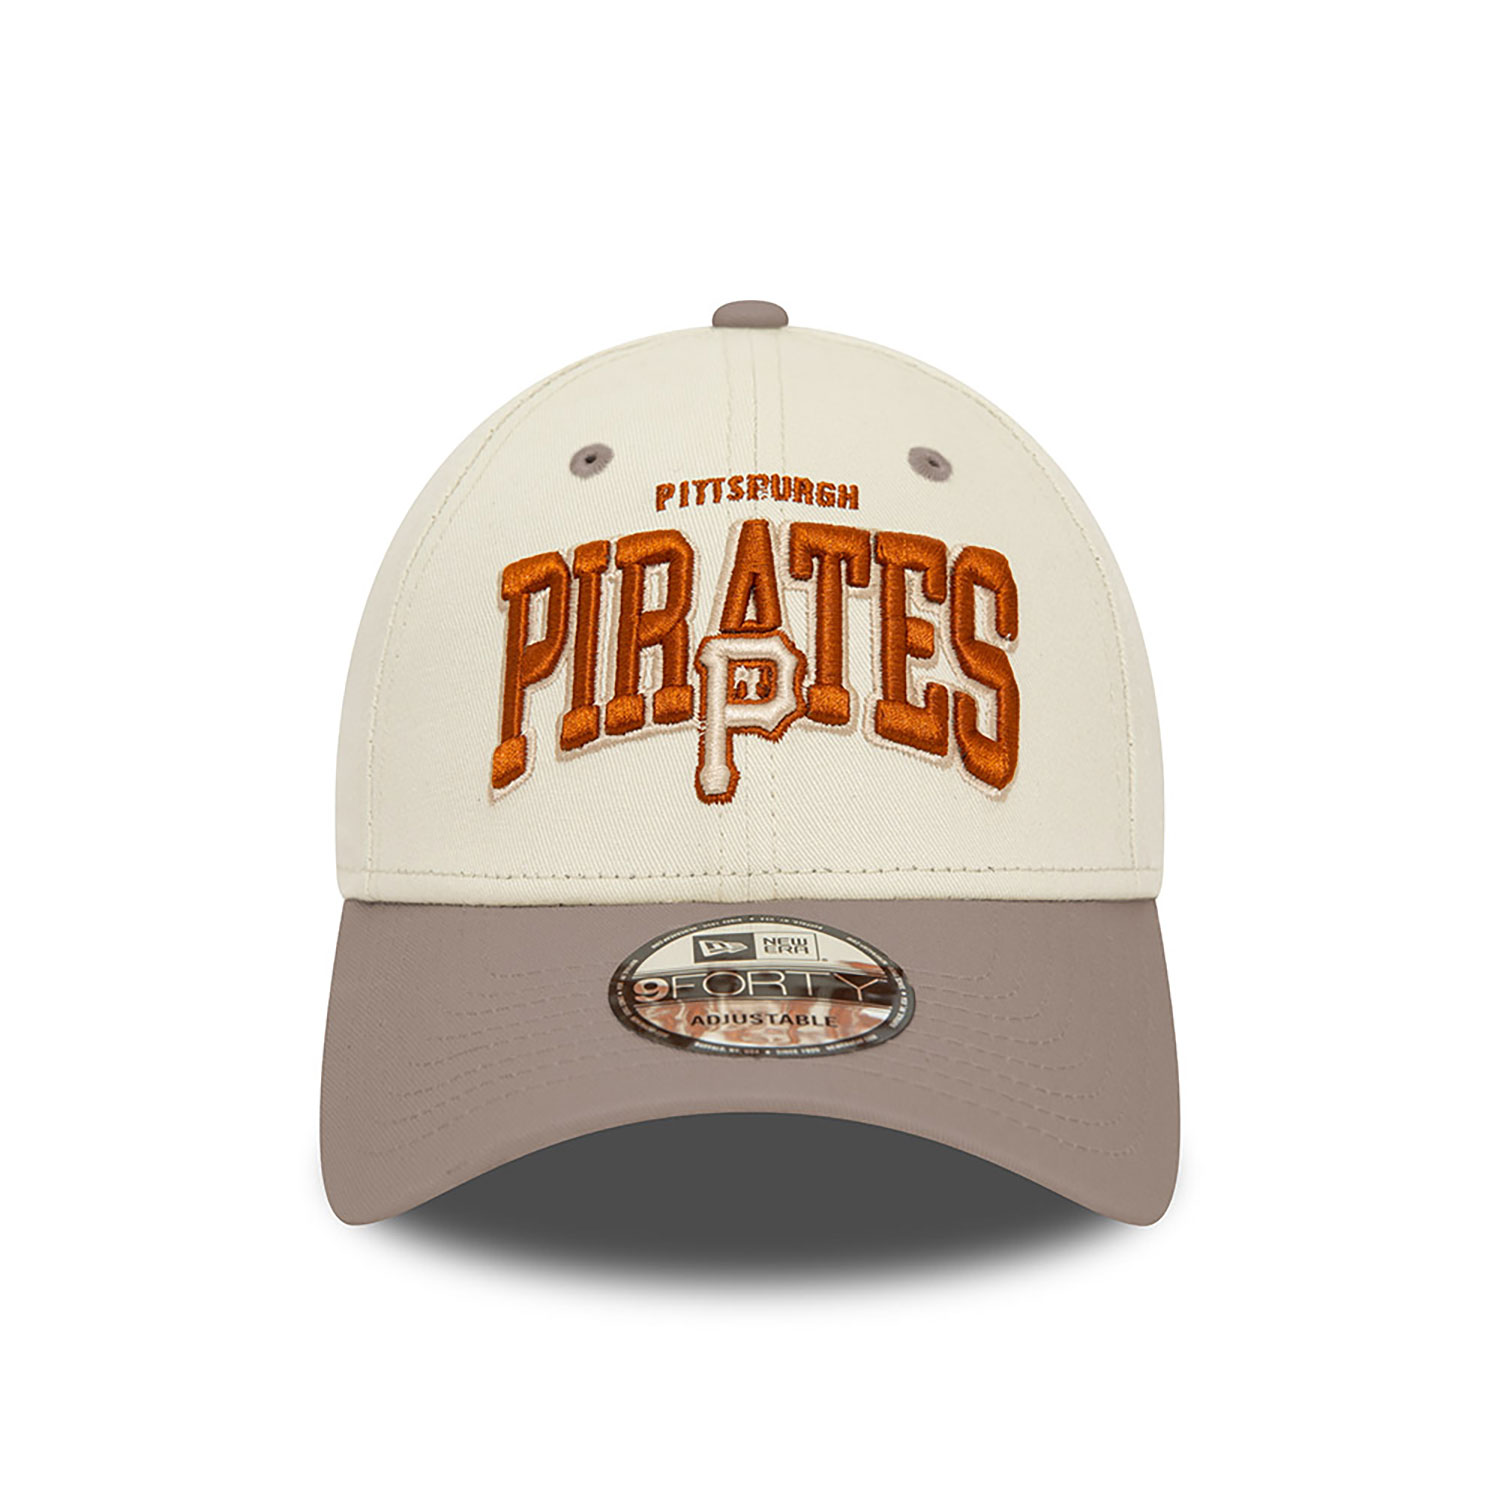 Pittsburgh Pirates White Crown Ivory 9FORTY Adjustable Cap